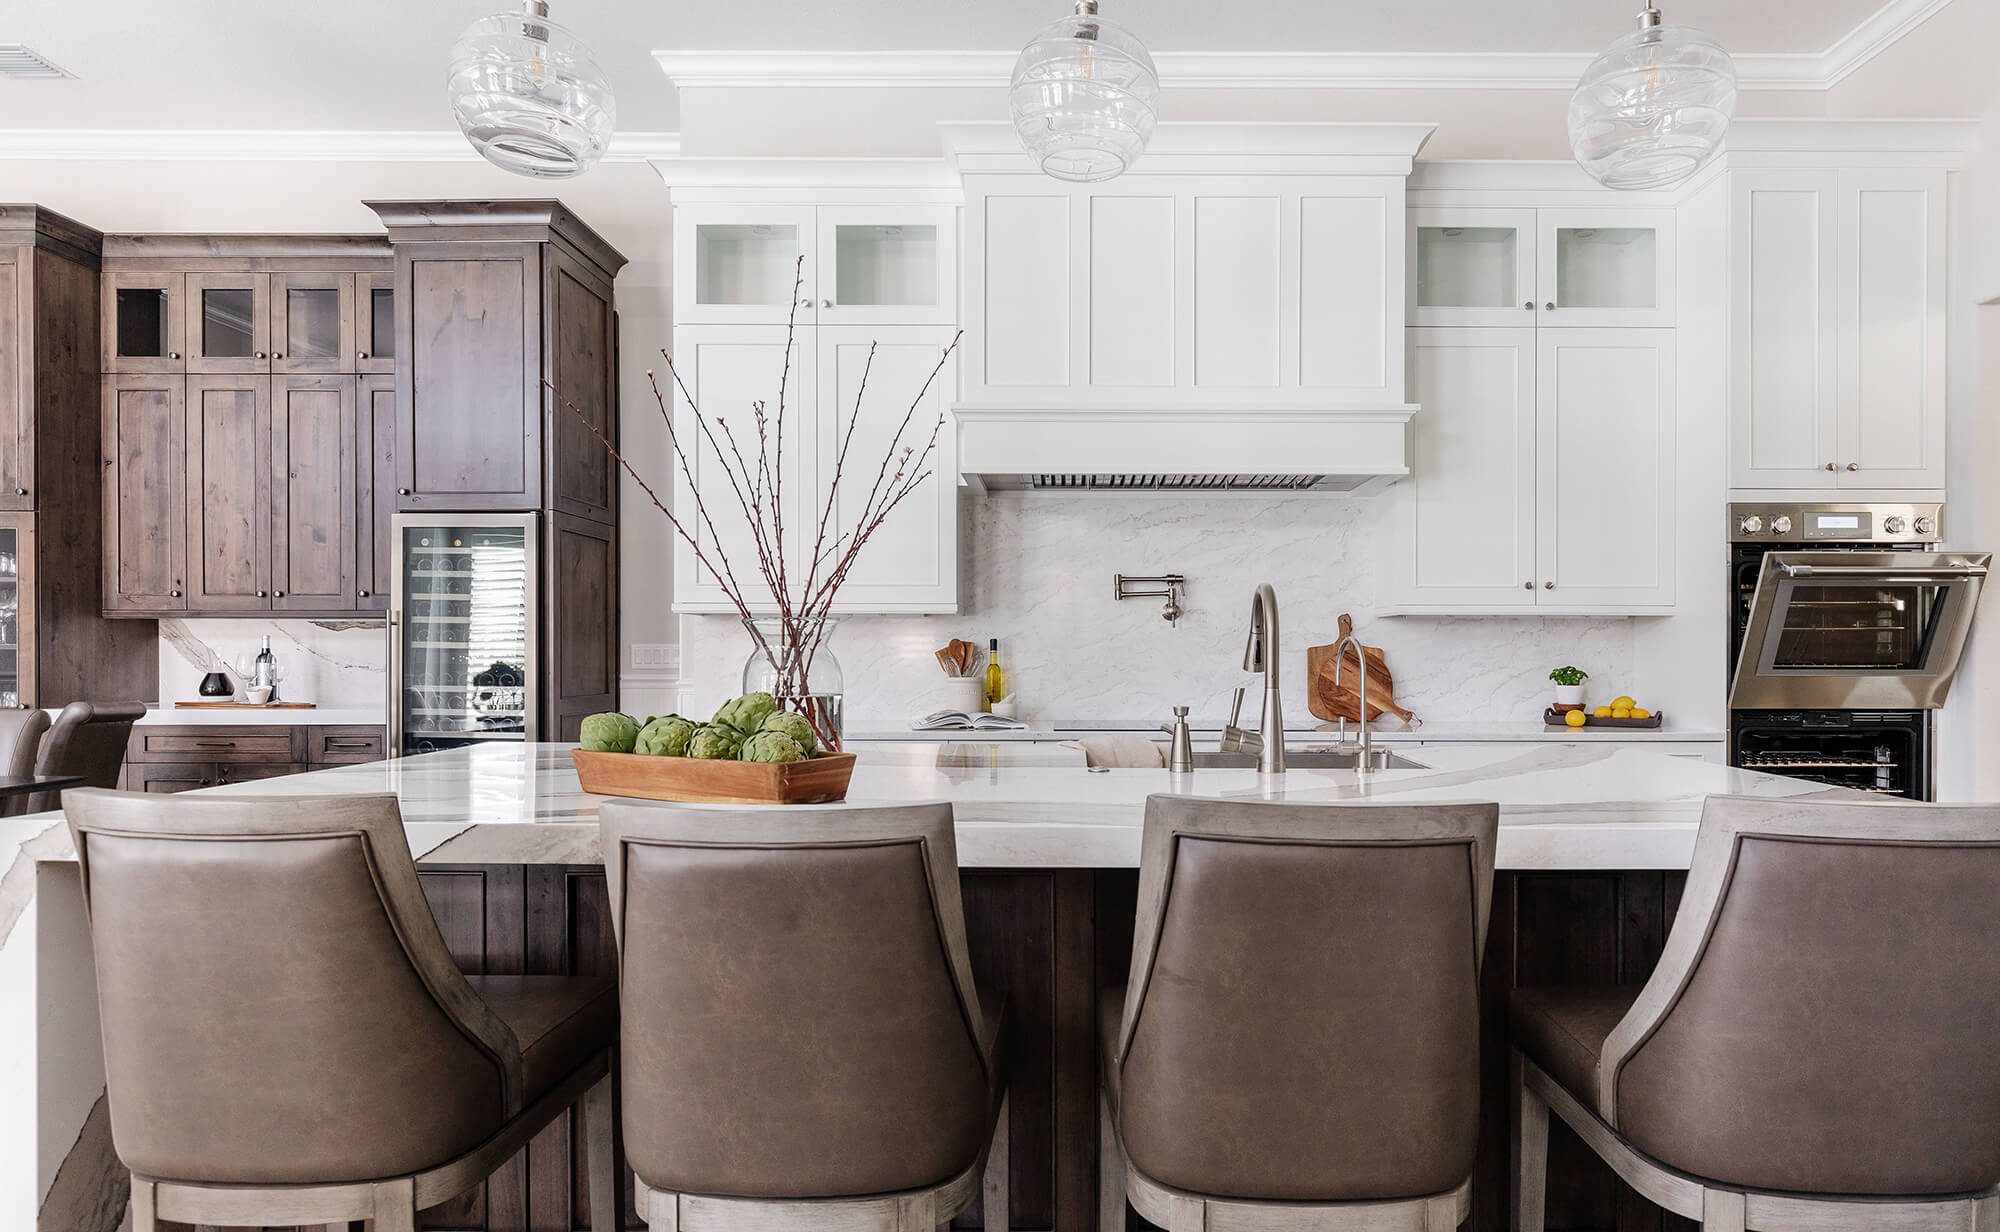 A beautiful kitchen with a warm color palette and bright white painted cabinets.